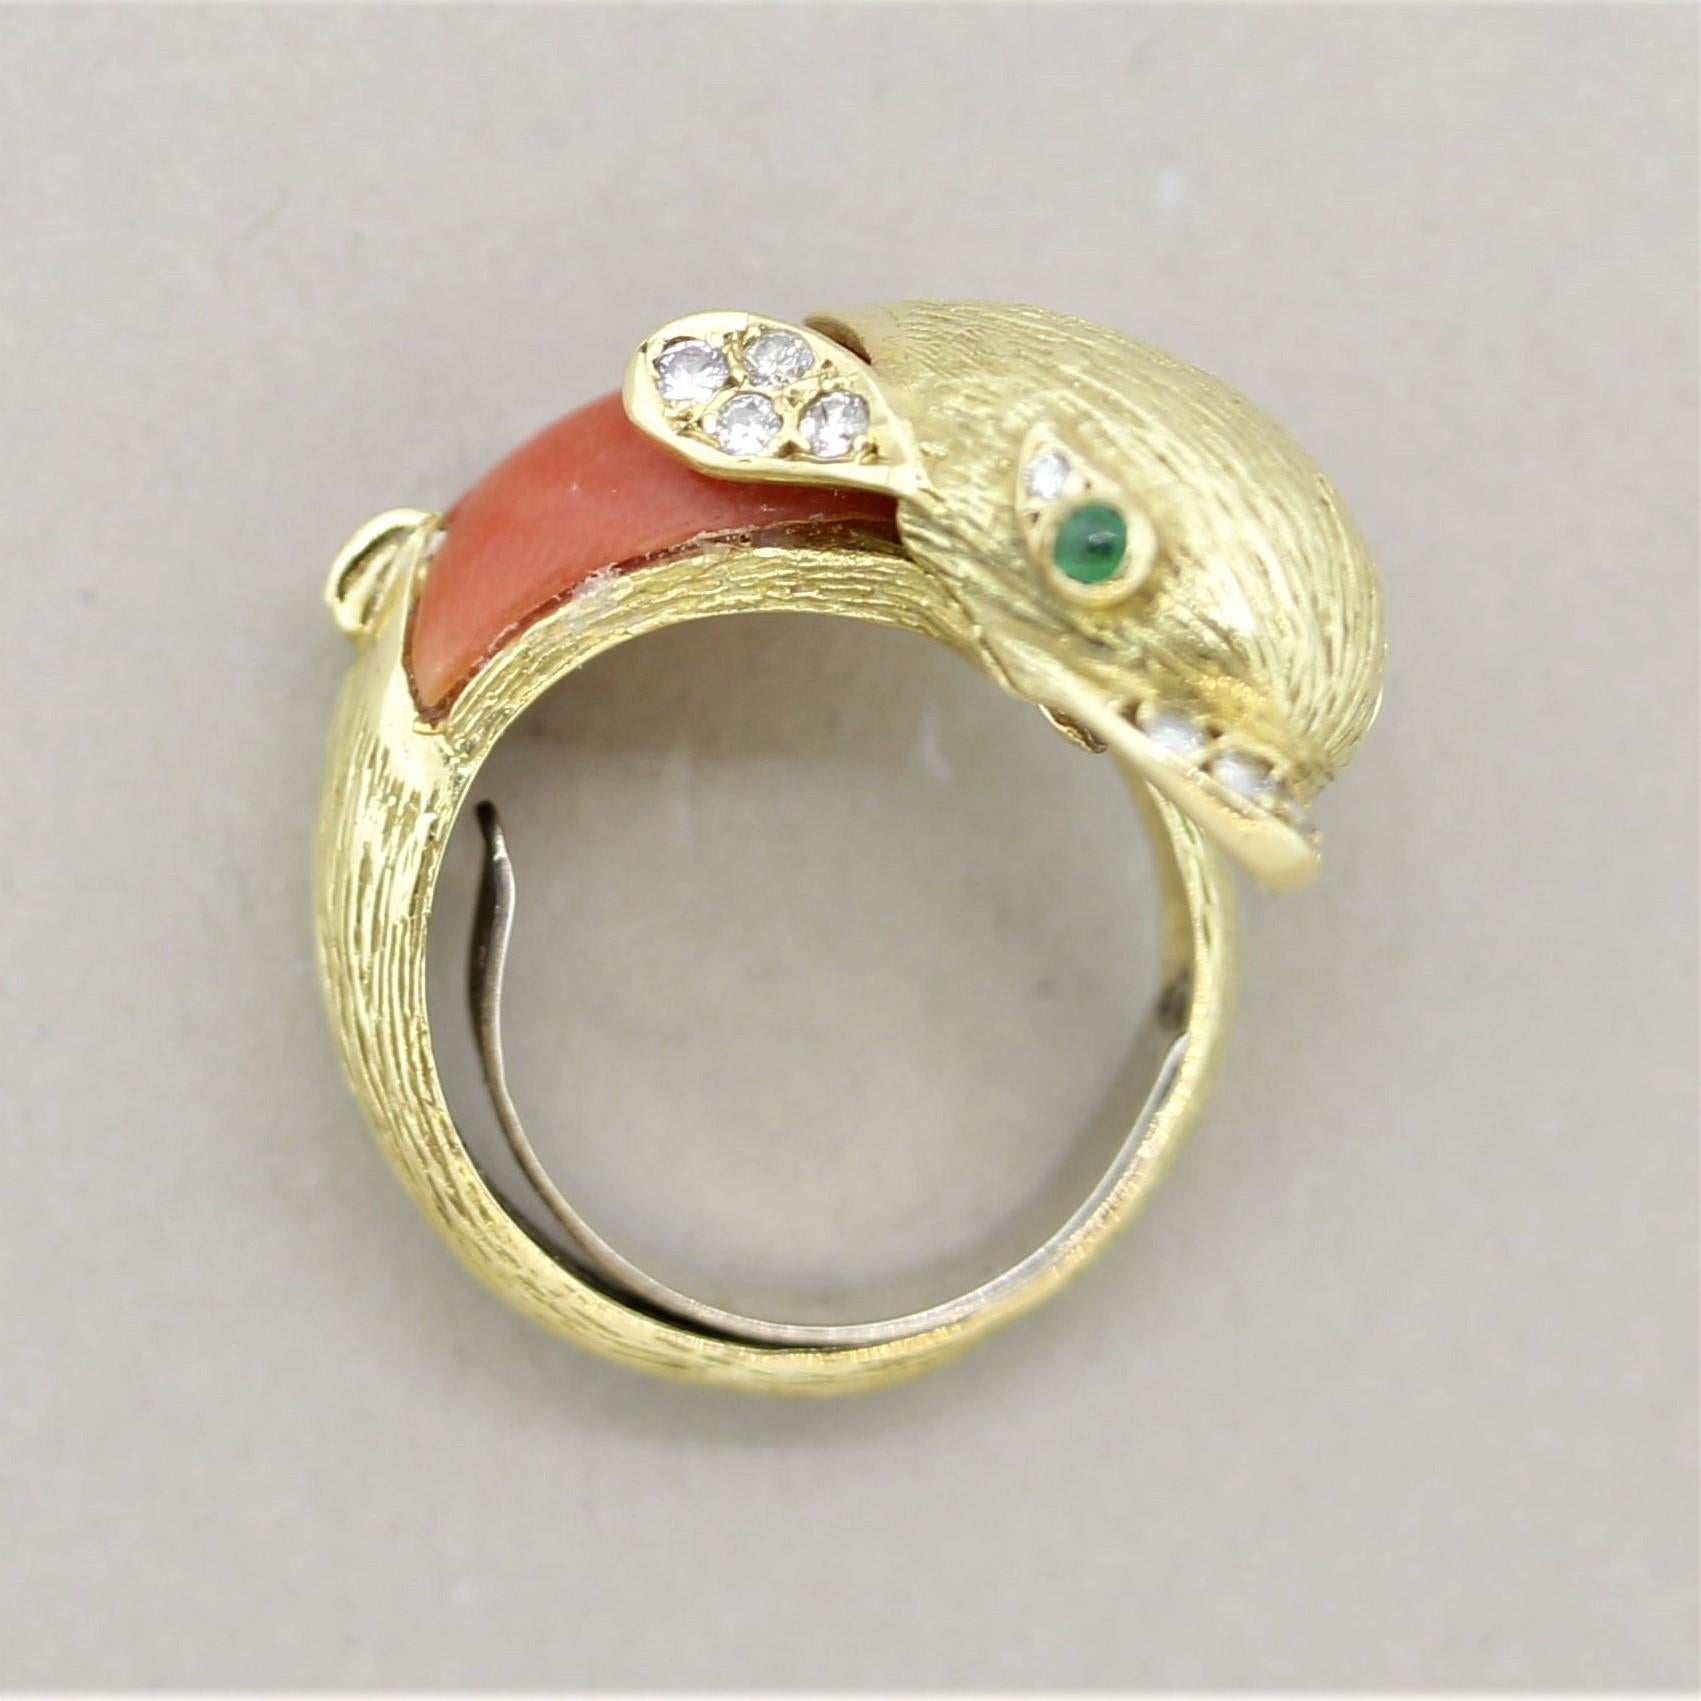 A sweet and stylish dolphin ring! It is made of a coral body with round brilliant-cut diamonds set as its beak and flippers and two emeralds are used as its mesmerizing eyes. Made in 18k yellow gold and ready to be worn! Circa 1970s’s.

Ring Size 5